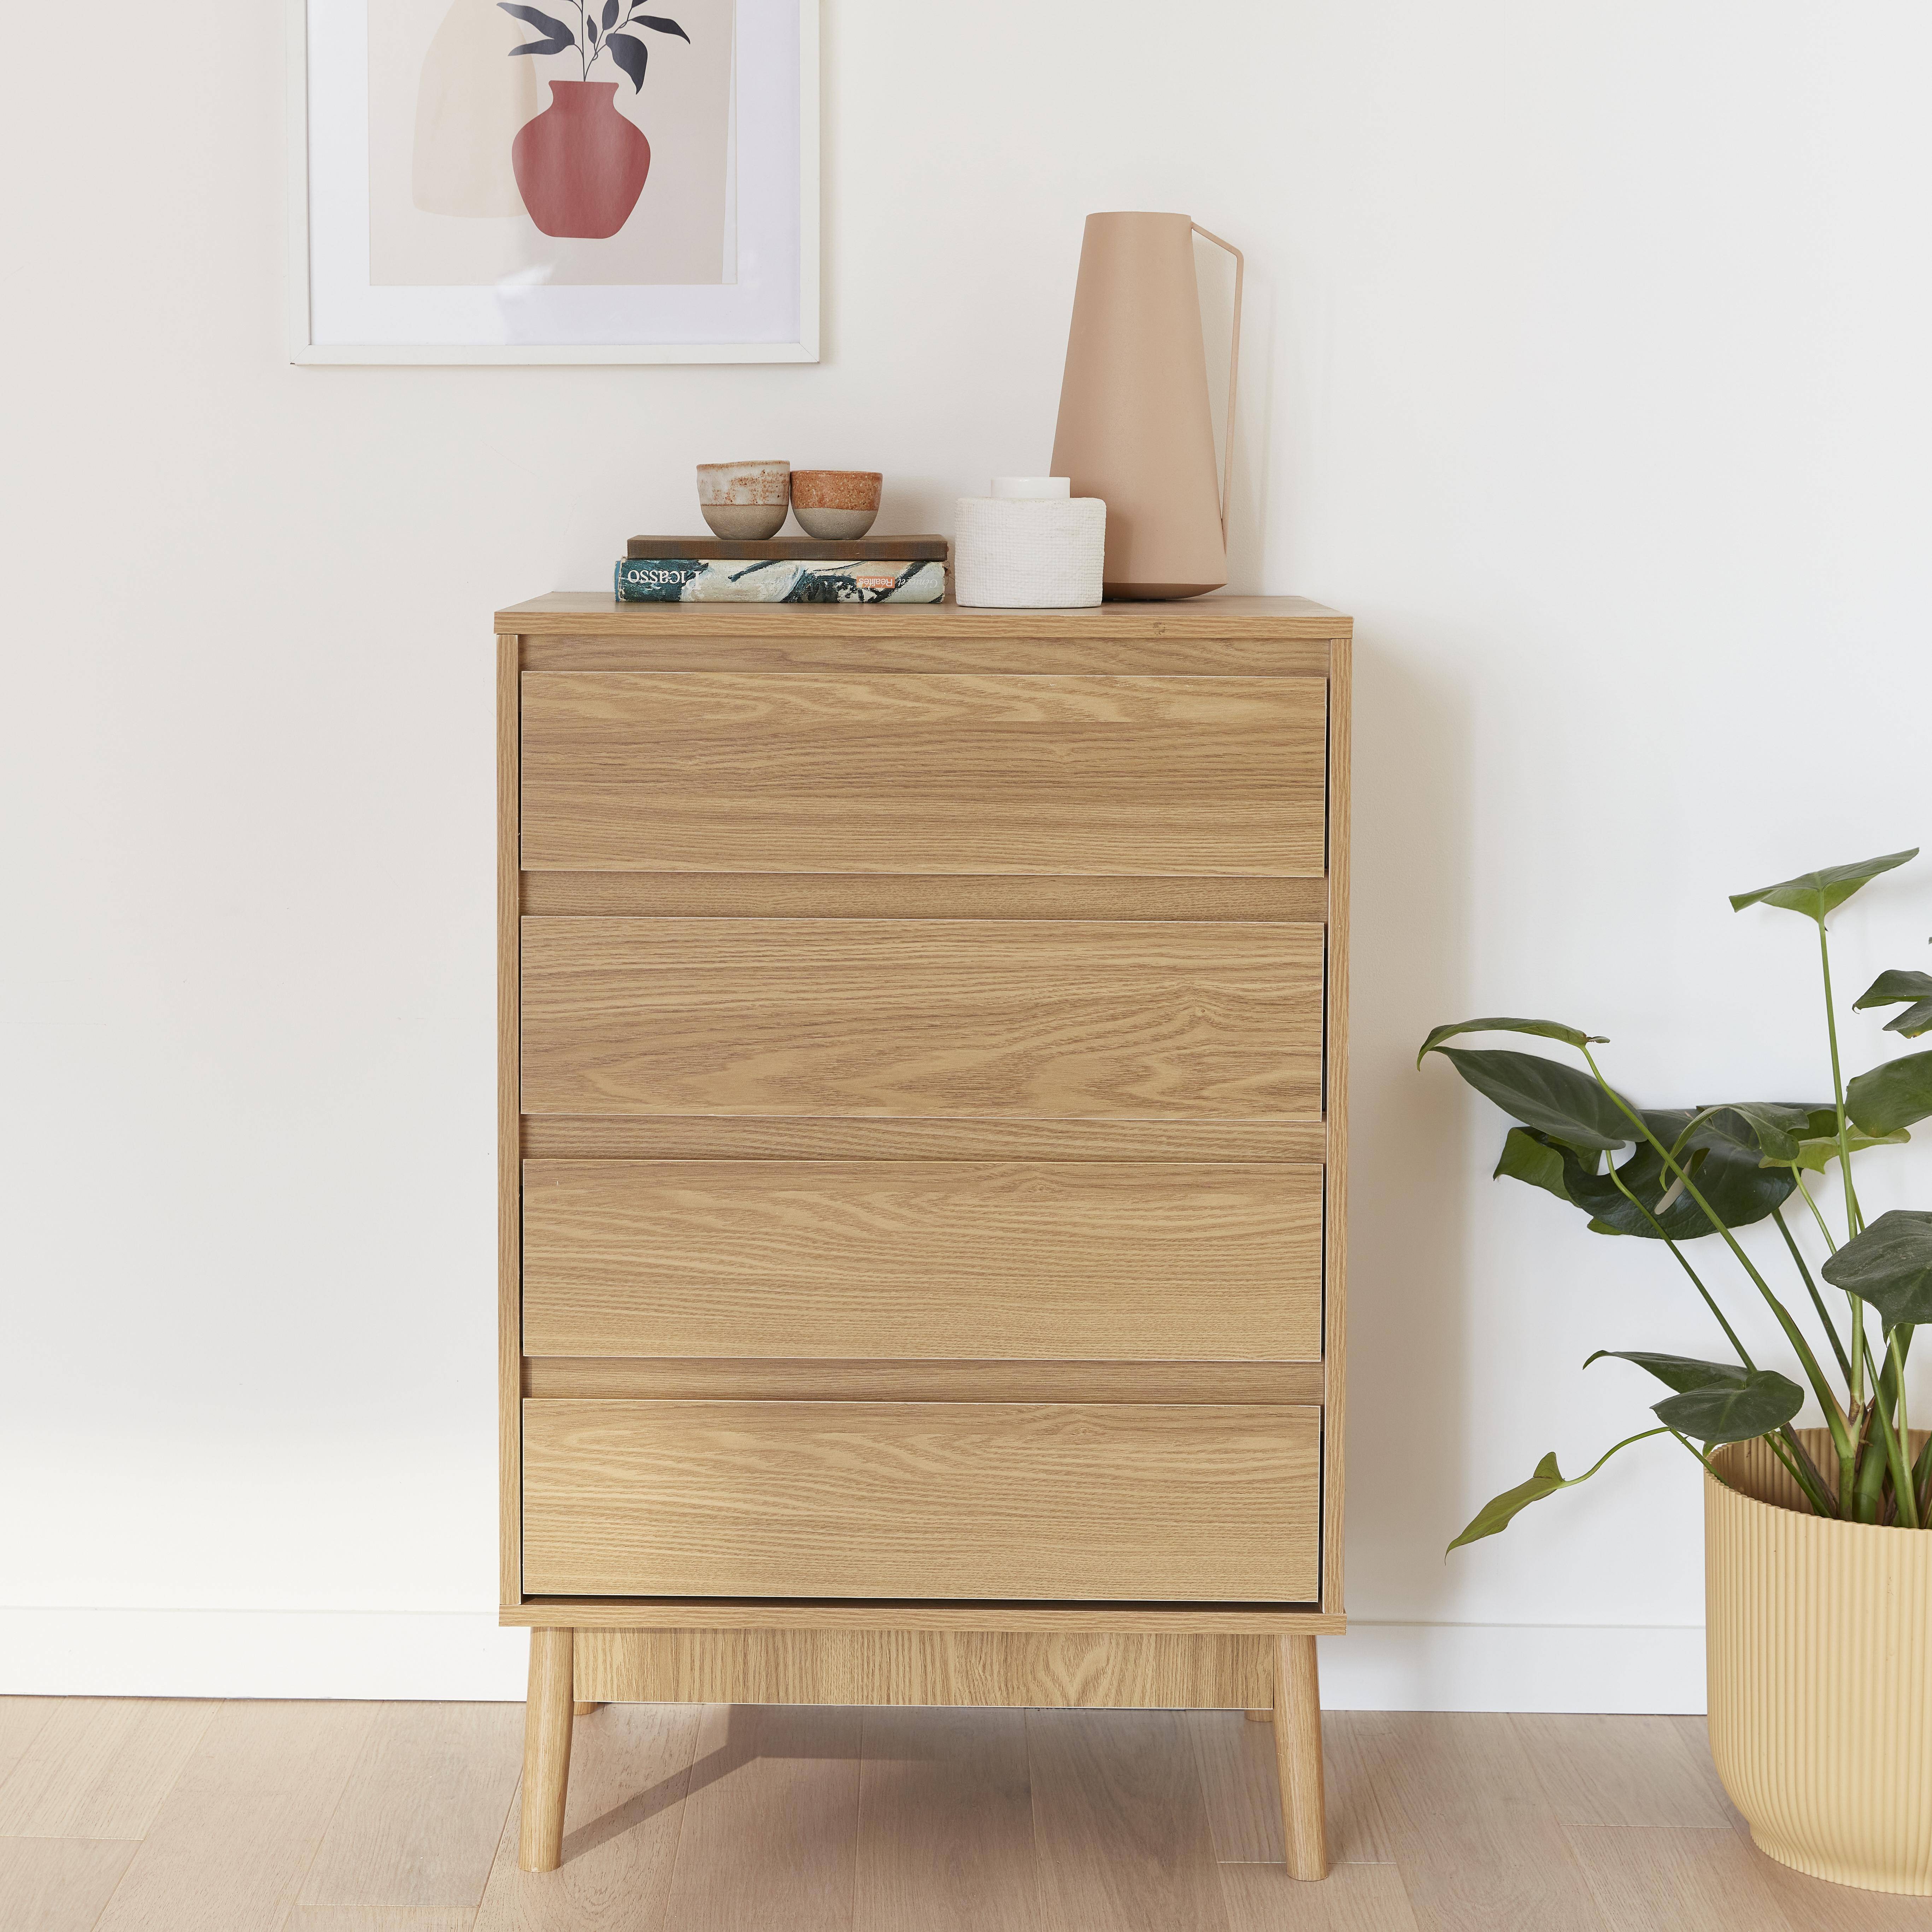 Wooden 4-drawer chest, 60x40x91cm - Dune - Natural wood colour Photo2